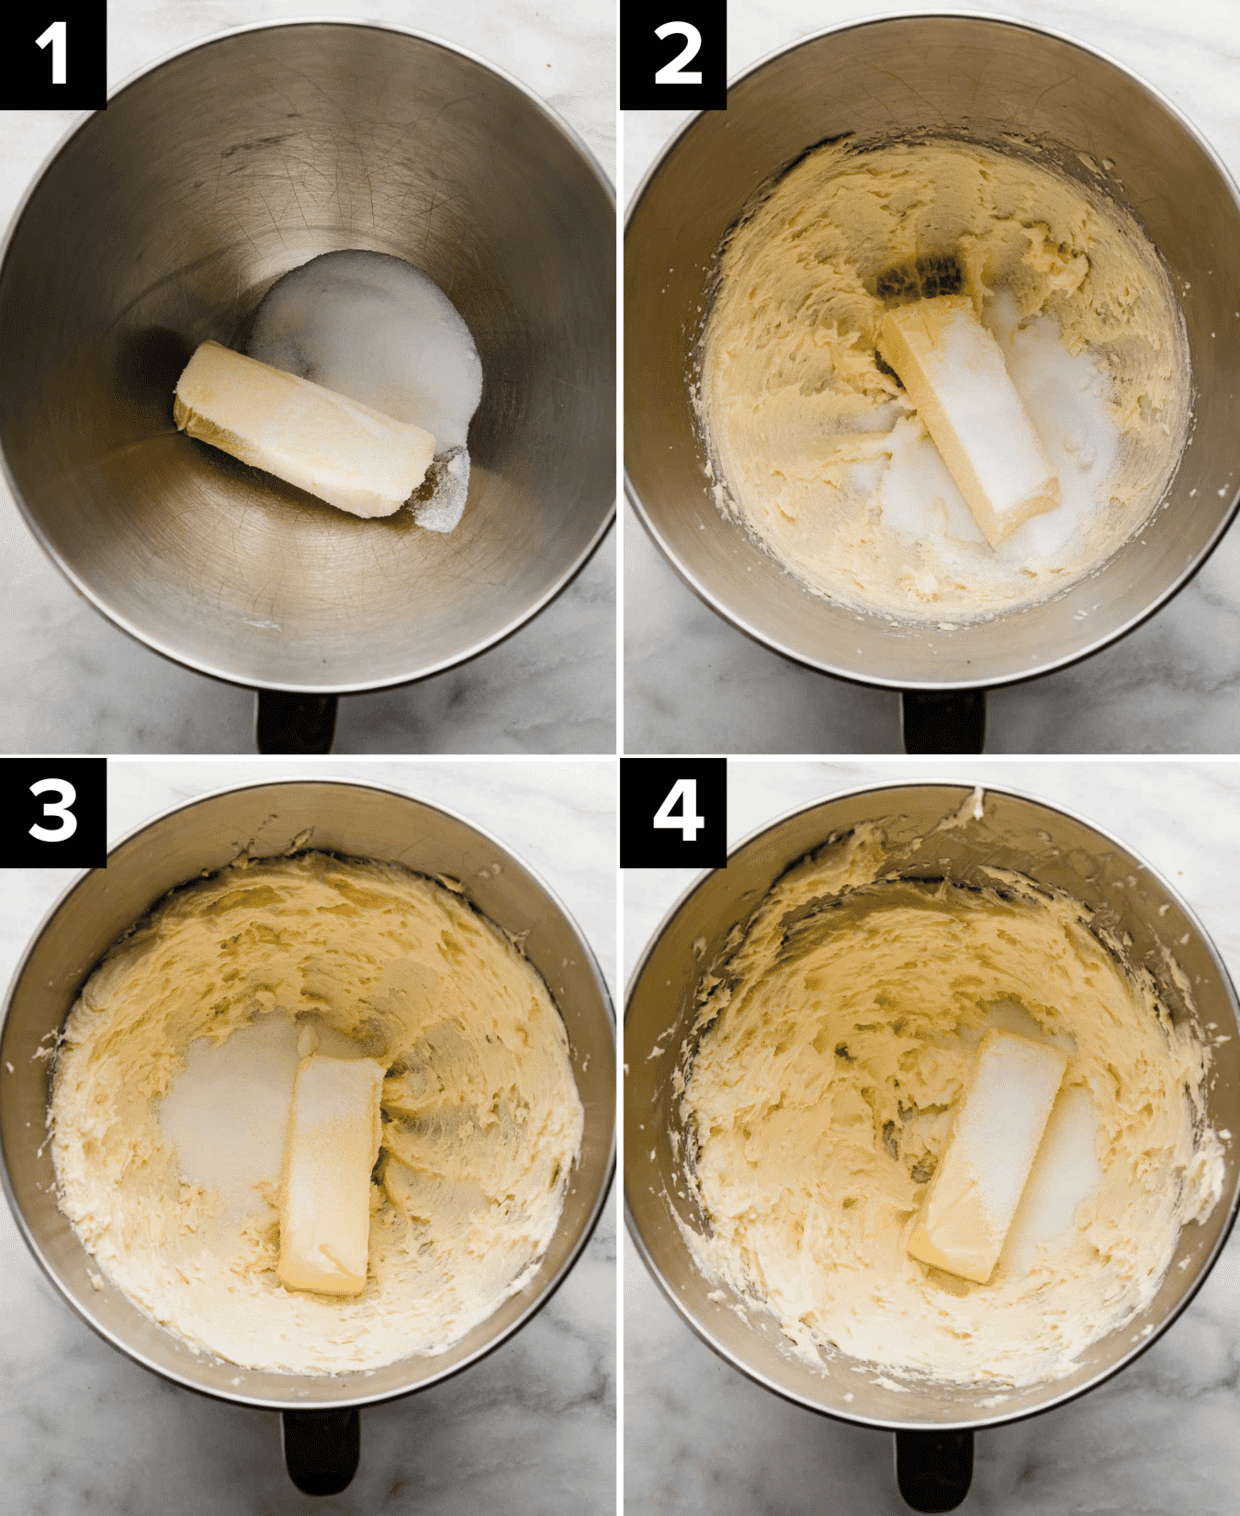 Four images showing the making of Grandma's Shortbread Cookies, a silver mixing bowl with butter and sugar being creamed in stages.